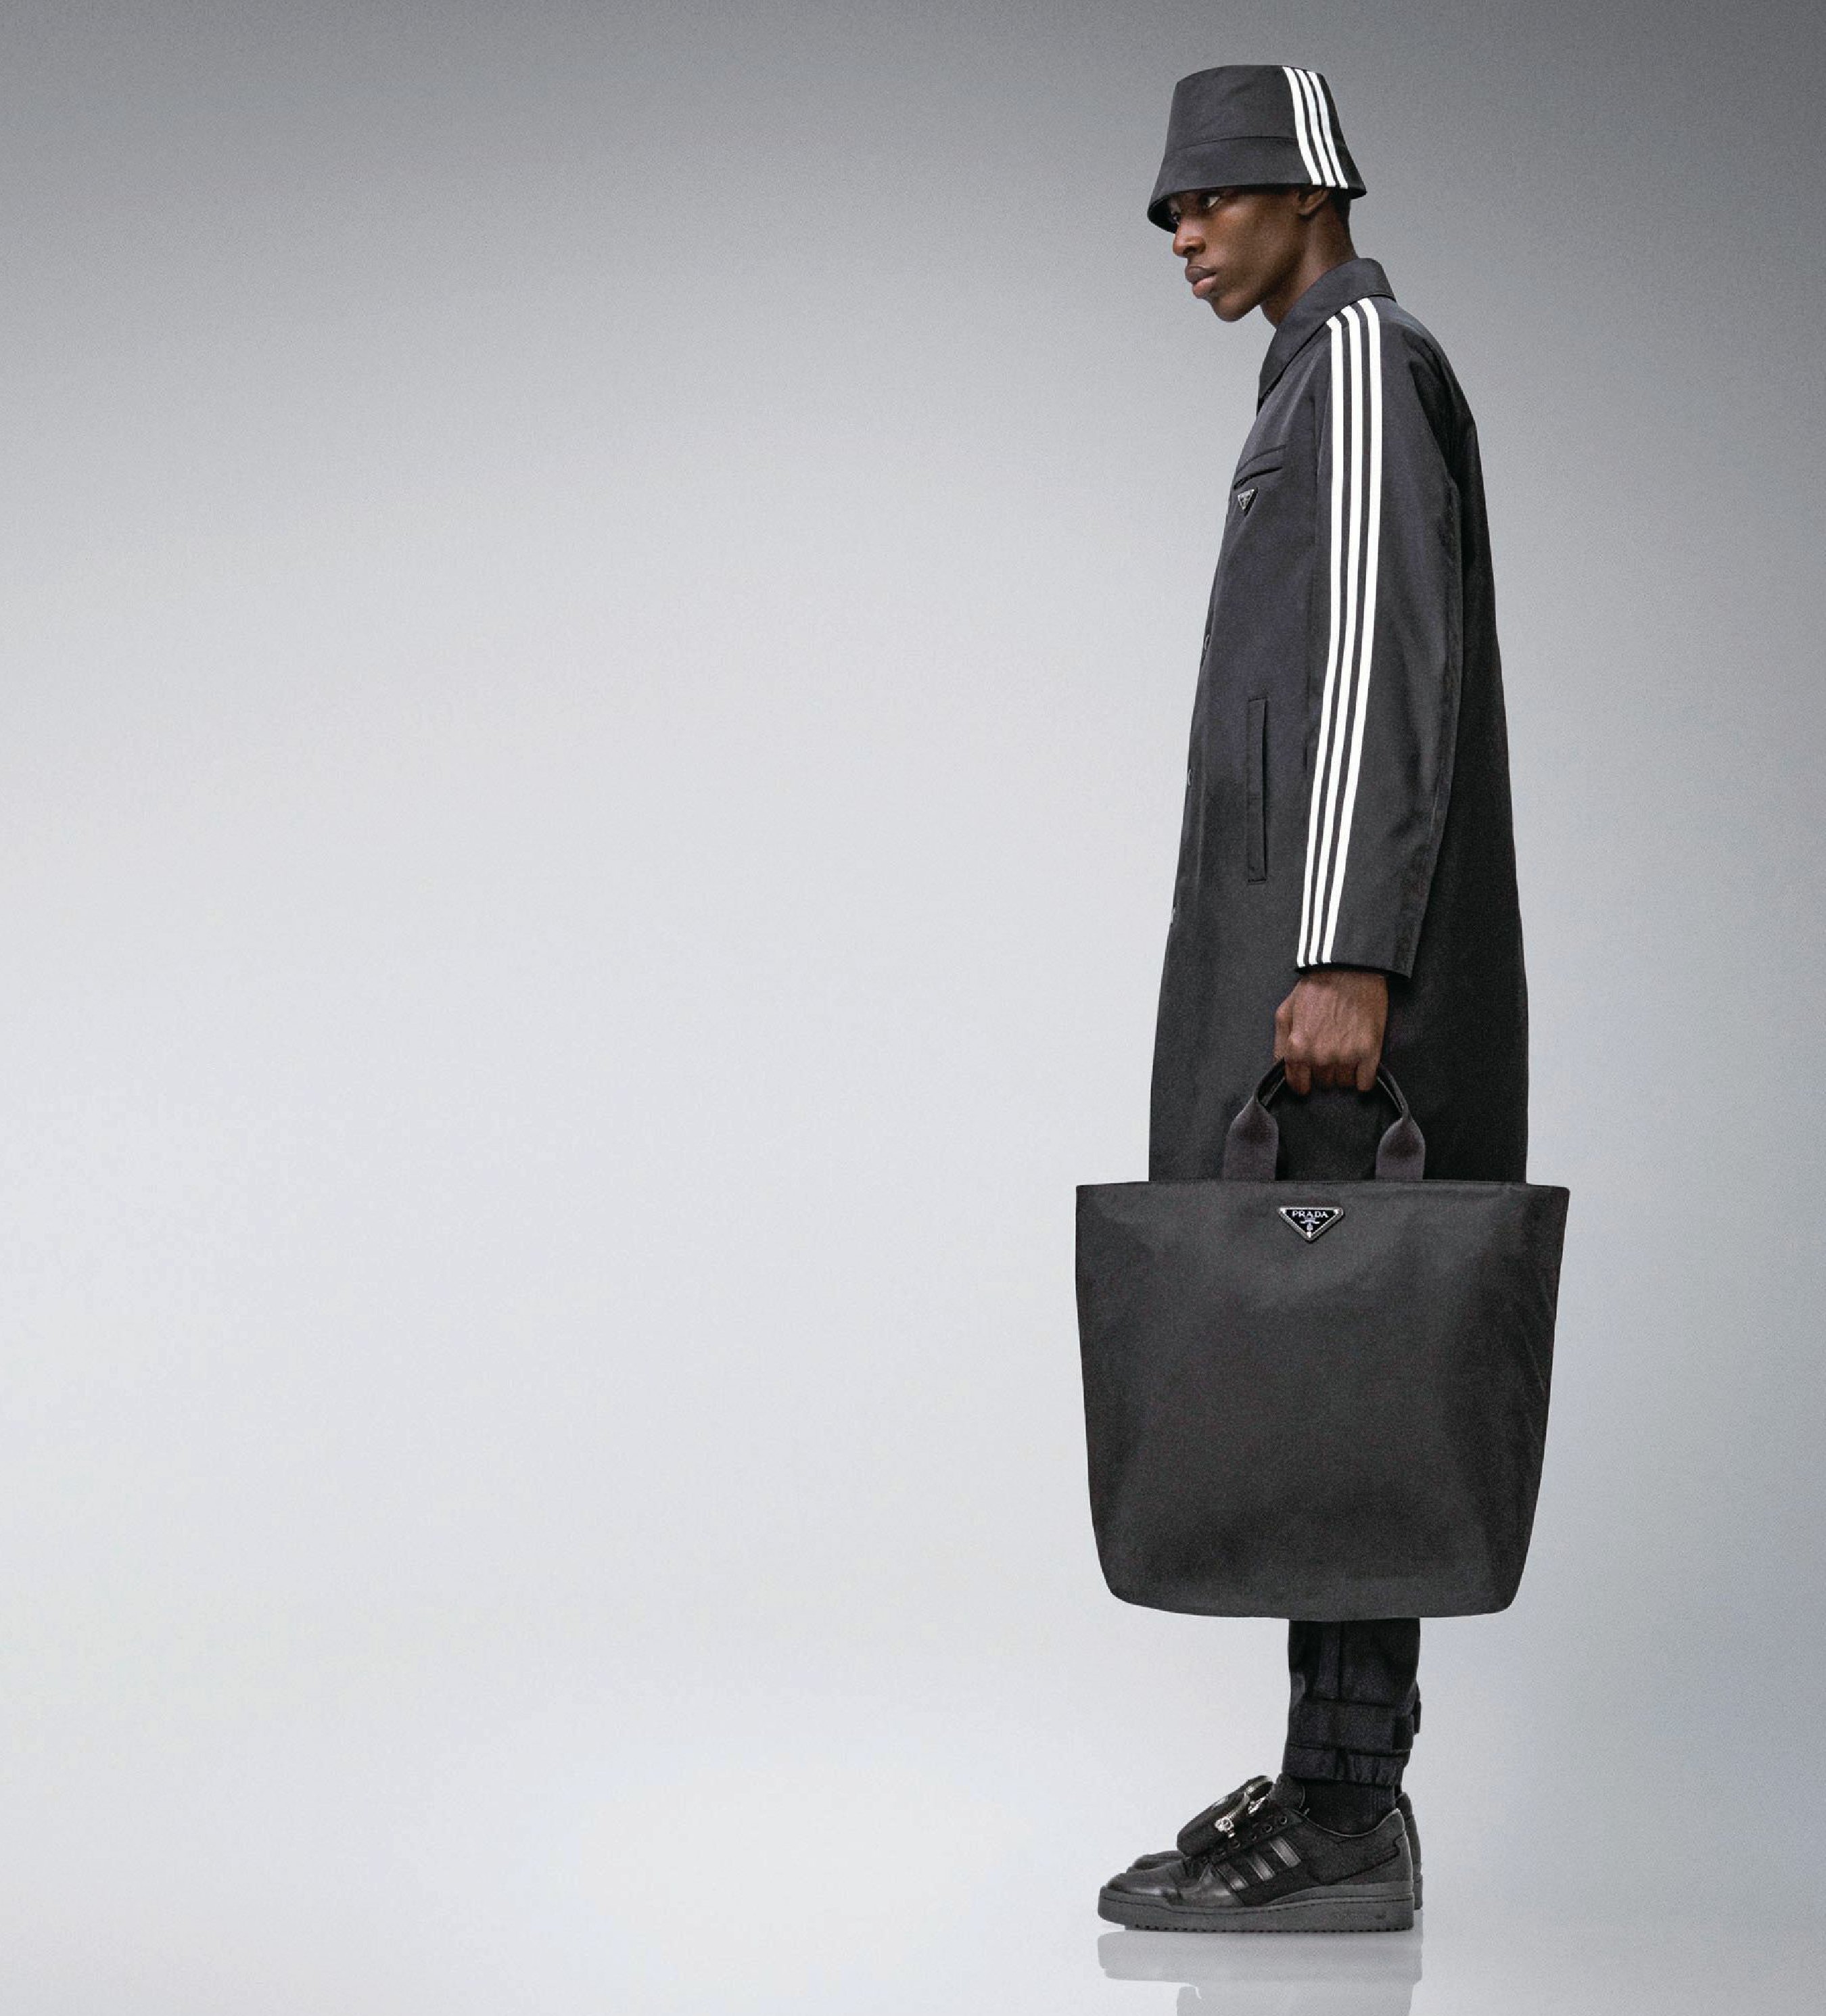 Adidas x Prada Re-Nylon collection, released in January PHOTO COURTESY OF ADIDAS ORIGINALS